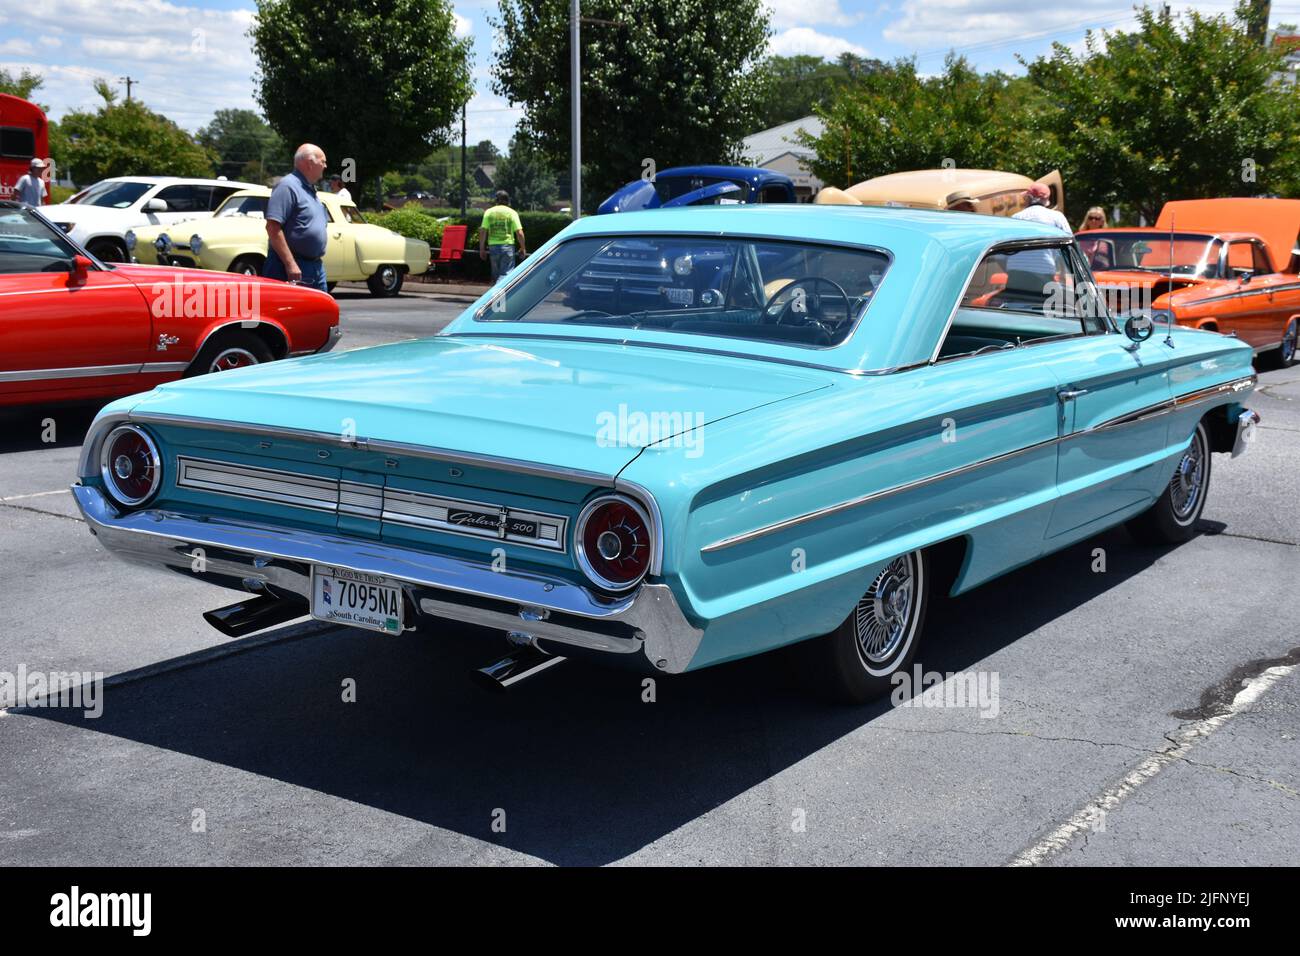 A 1964 Ford Galaxy 500 2 Door Hard Top on display at a car show. Stock Photo